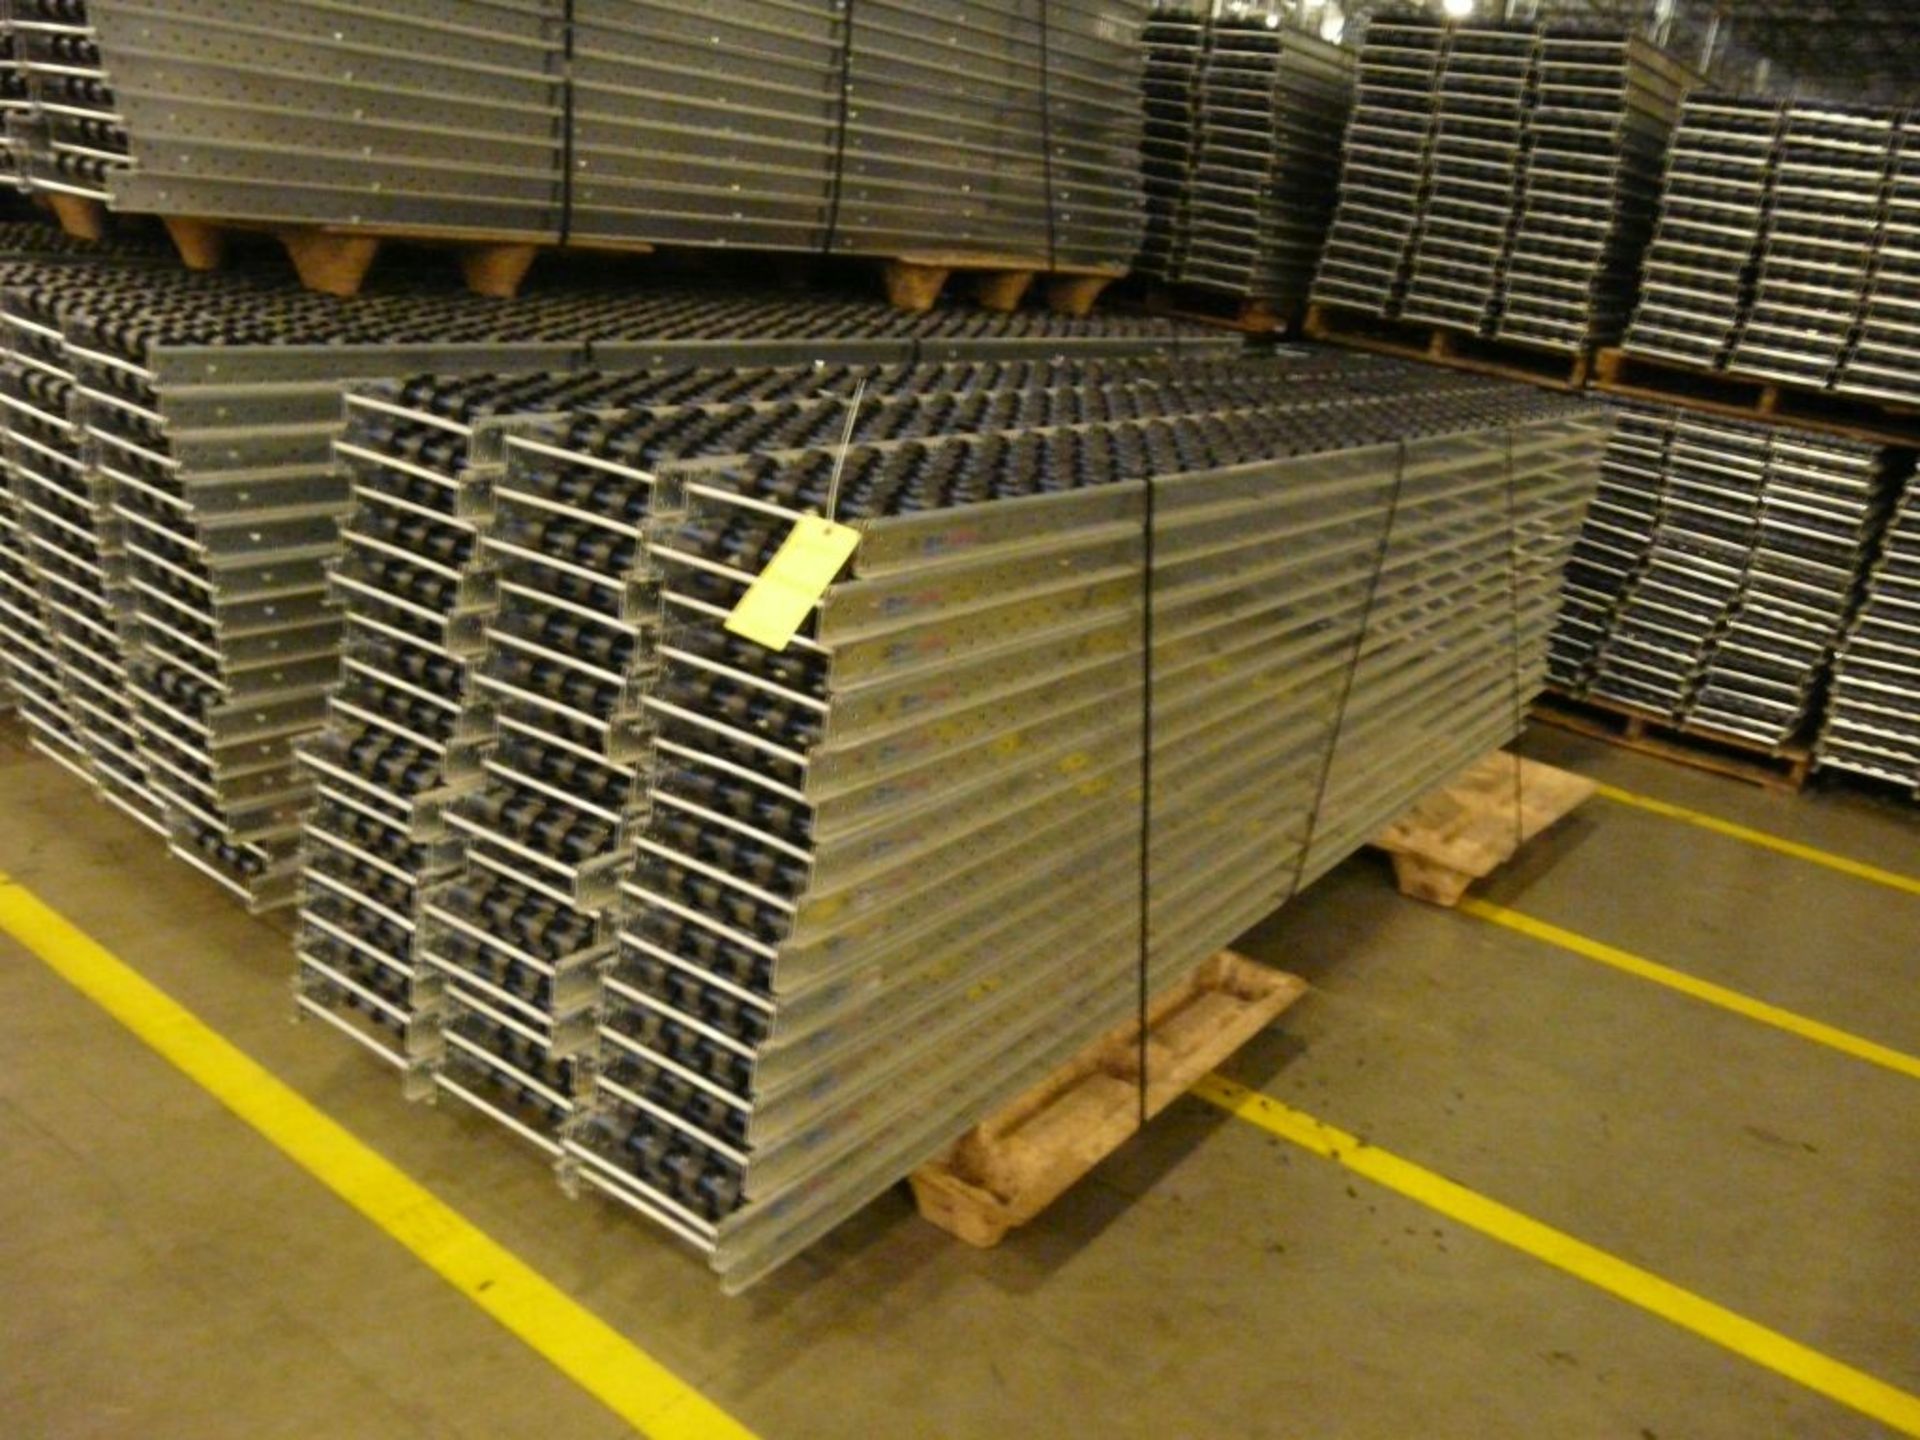 Lot of (90) SpanTrack Wheelbed Carton Flow Conveyors - 11.5'L x 11"W; Tag: 224212 - $30 Lot